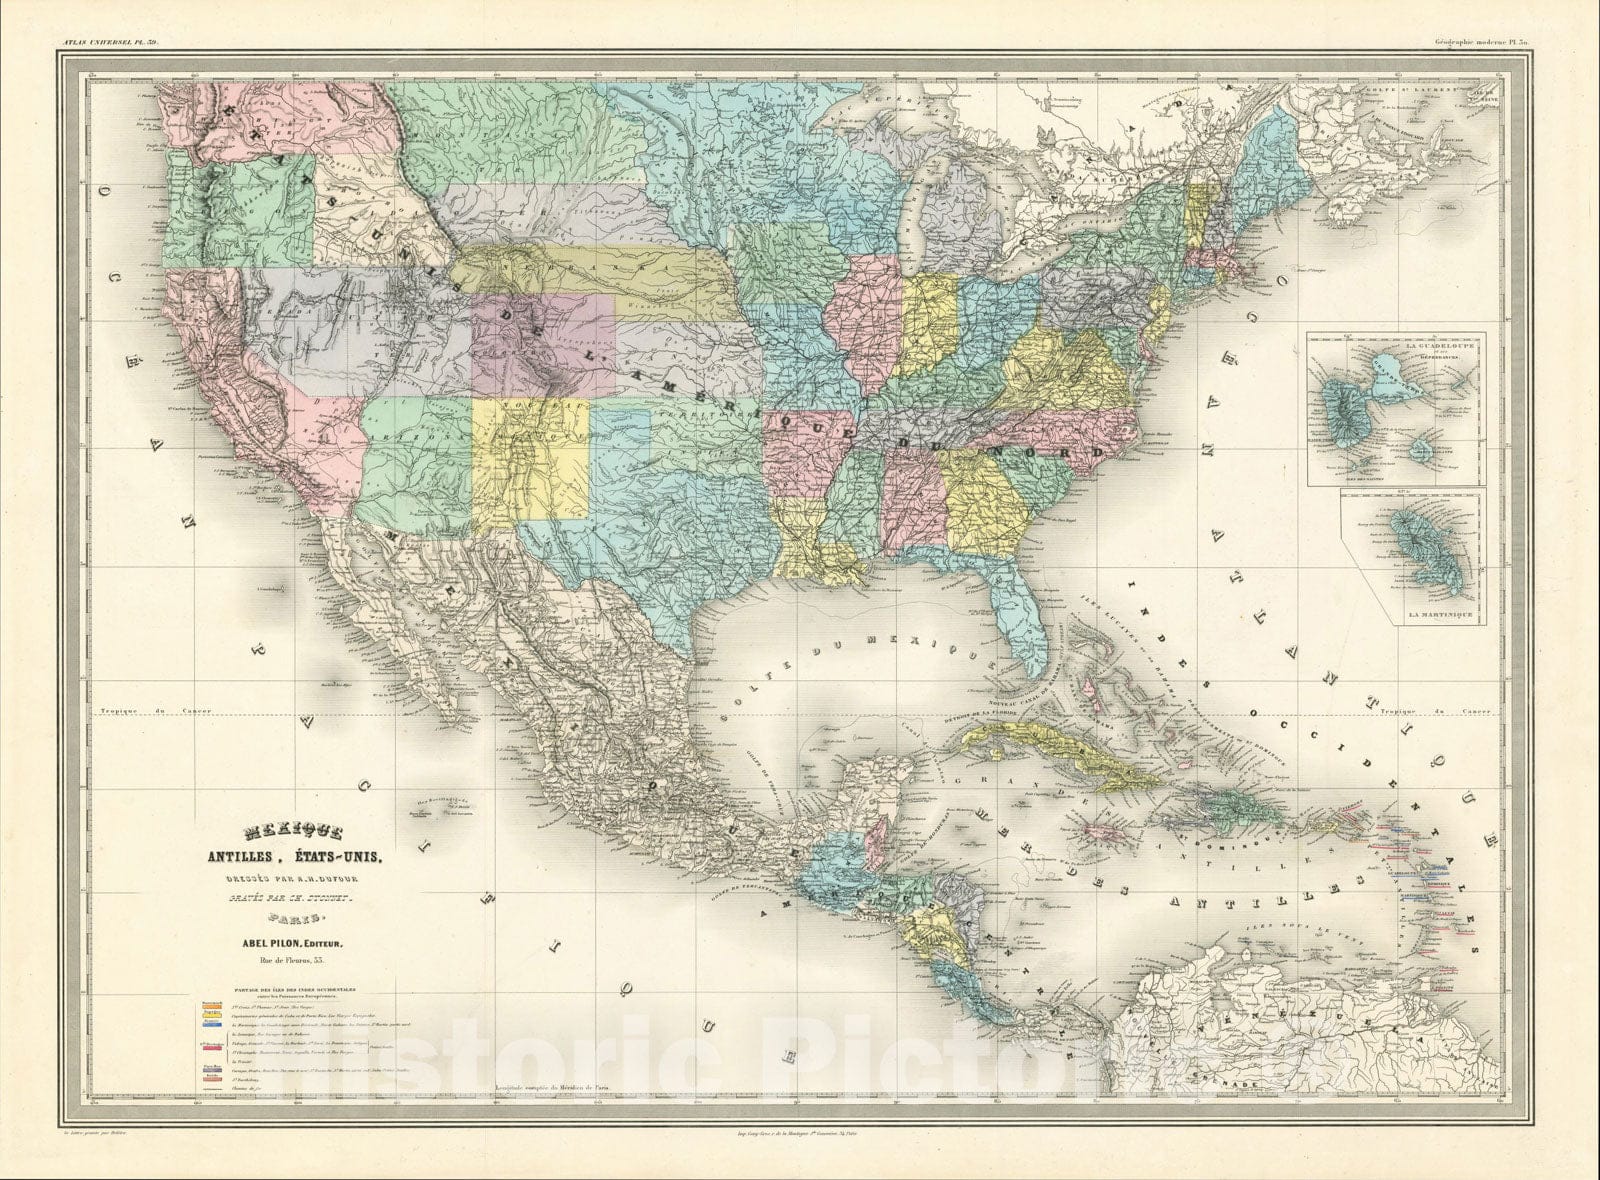 Historic Map : Mexique, Antilles, Etats-Unis (Early Depiction of Idaho Territory and Montana Territory), 1863, Adolphe Hippolyte Dufour, Vintage Wall Art